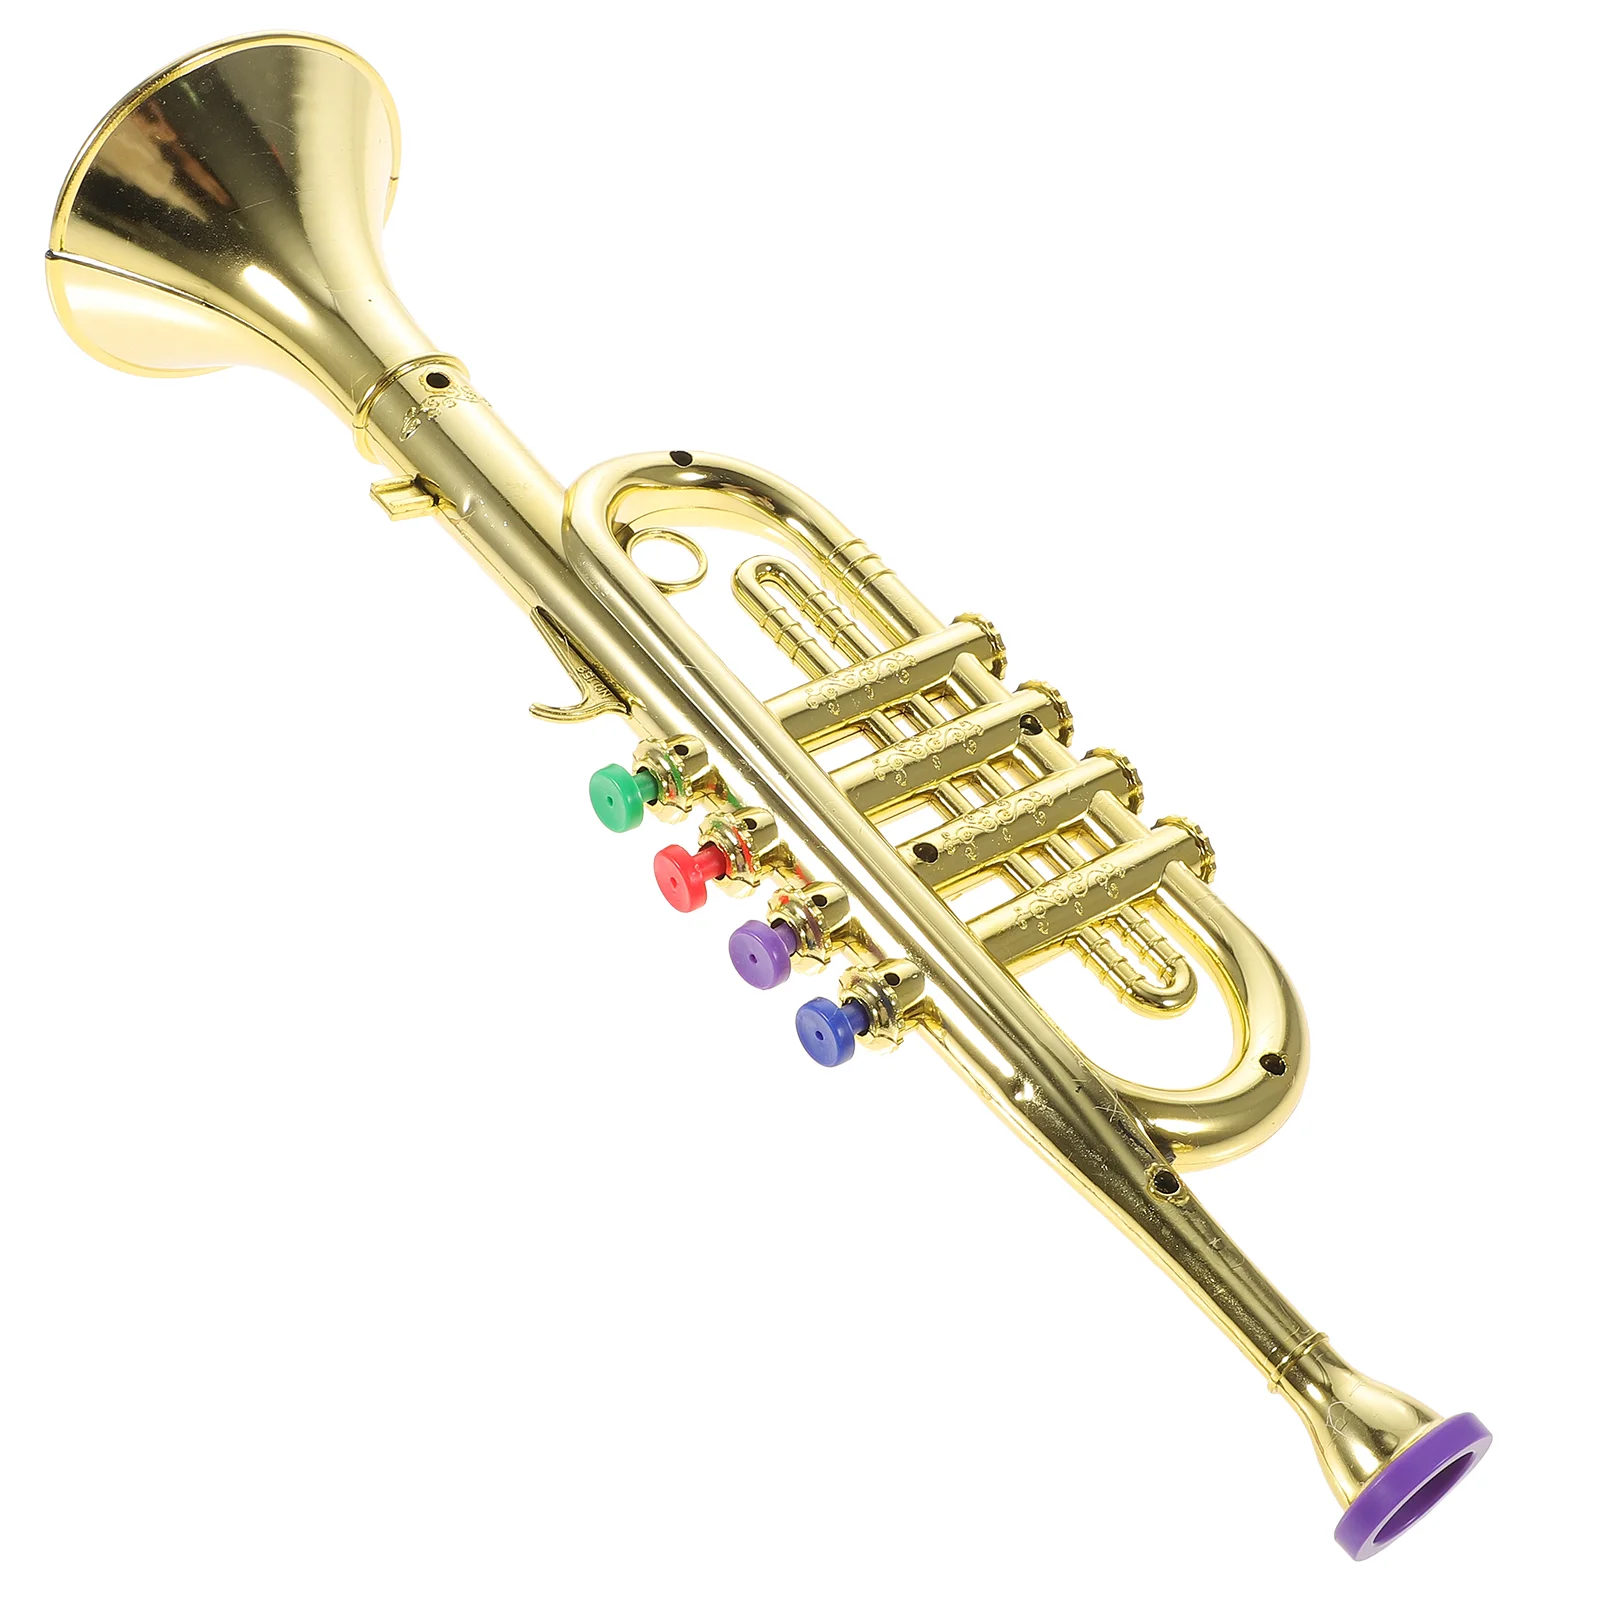 Alto Sax Toys Birthday Party Favor Children Musical Instrument Toy Trumpet Toy Musical Instrument Model enlarge